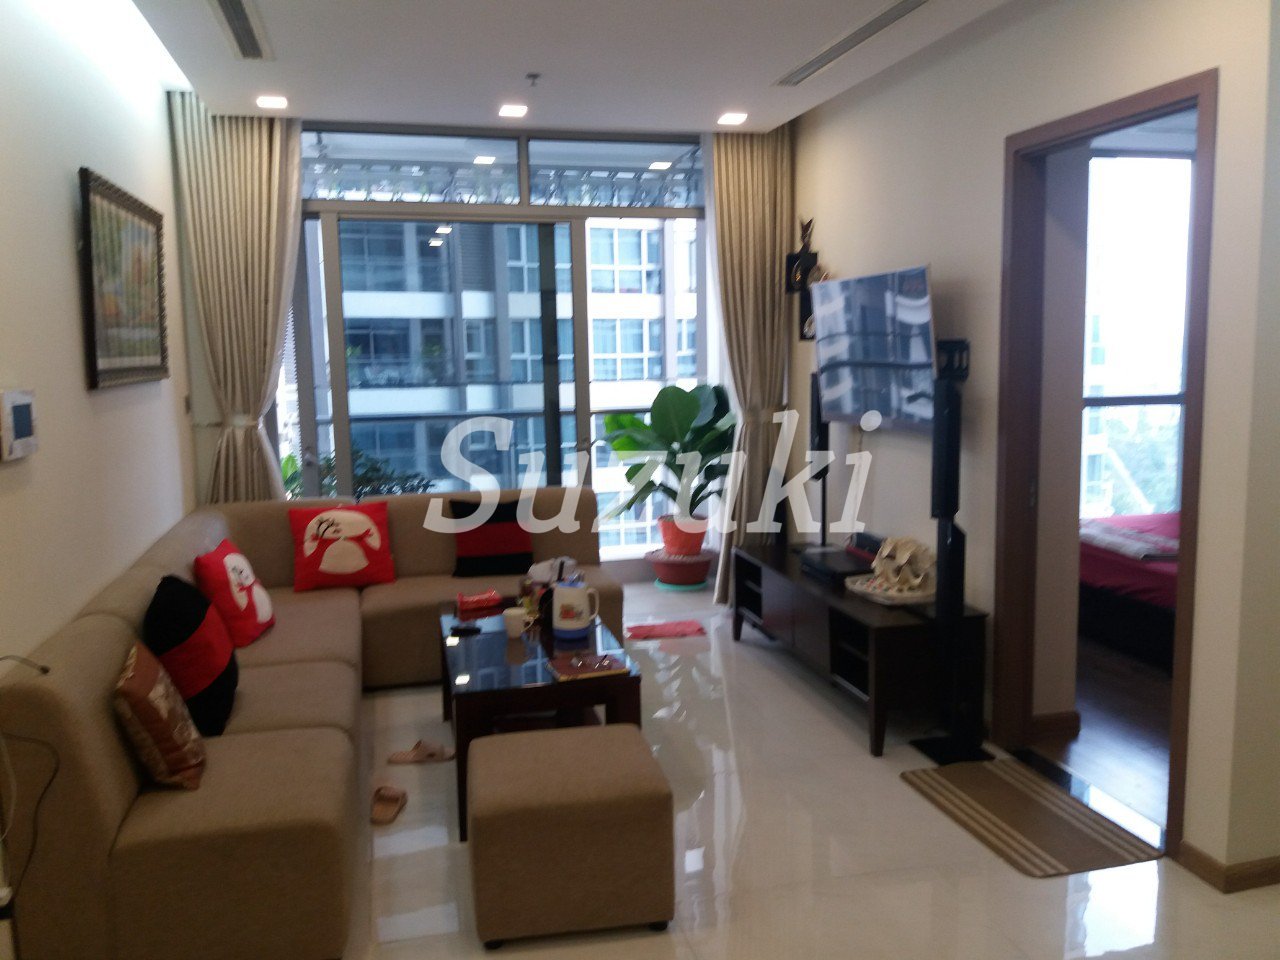 Vinhomes Central Park, a condominium popular among foreigners in Ho Chi Minh | 2LDK rental 75 square meters - 1150$-ST105P2618